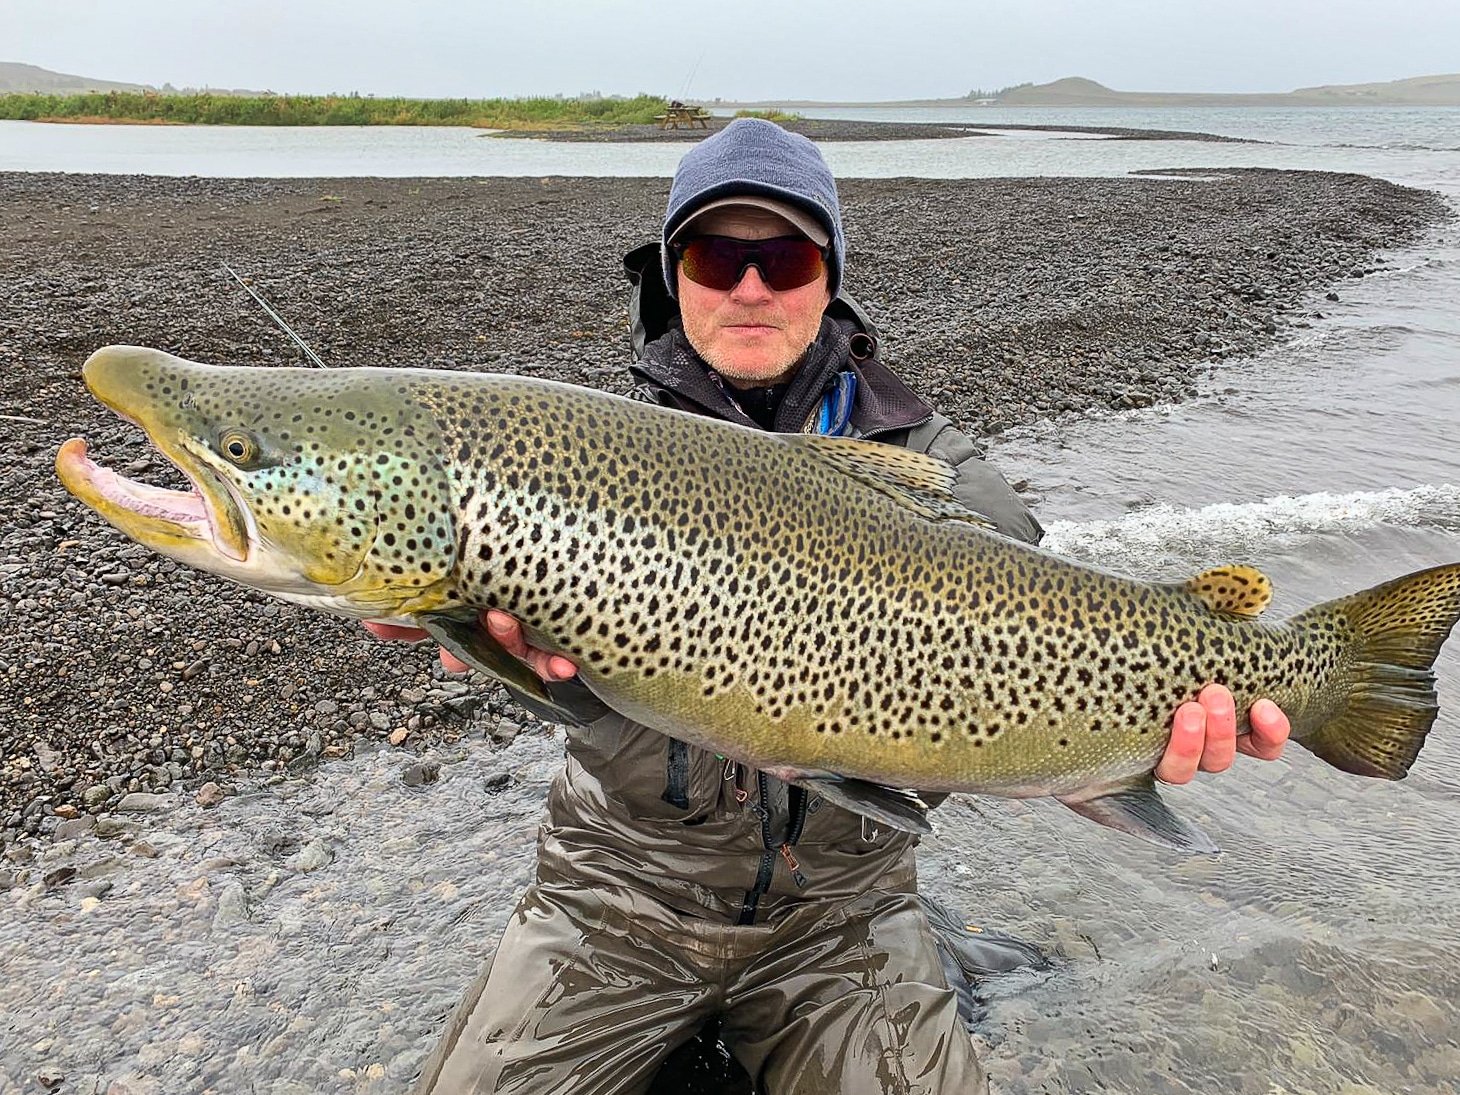 Sverir, the ultimate fishing guide, shows off his catch of the day!